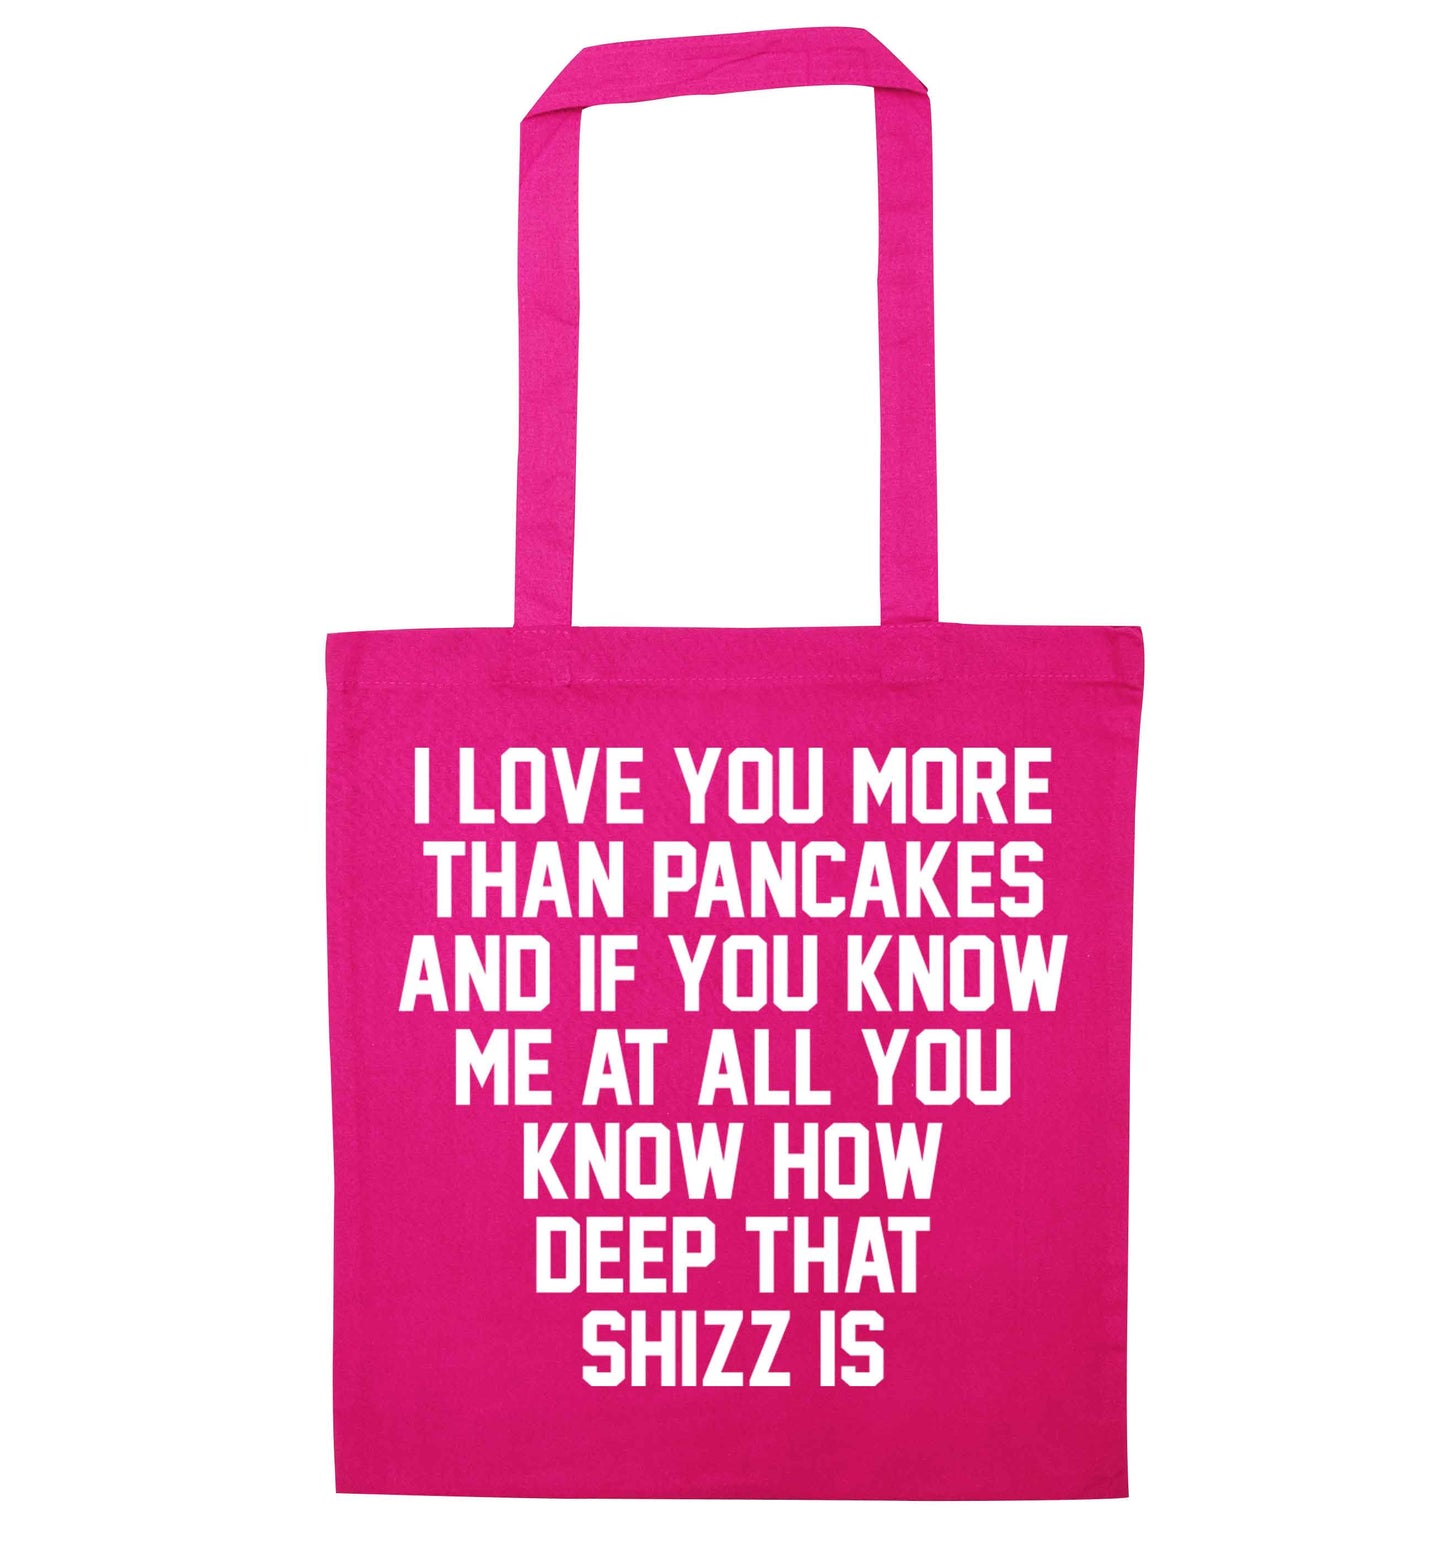 I love you more than pancakes and if you know me at all you know how deep that shizz is pink tote bag